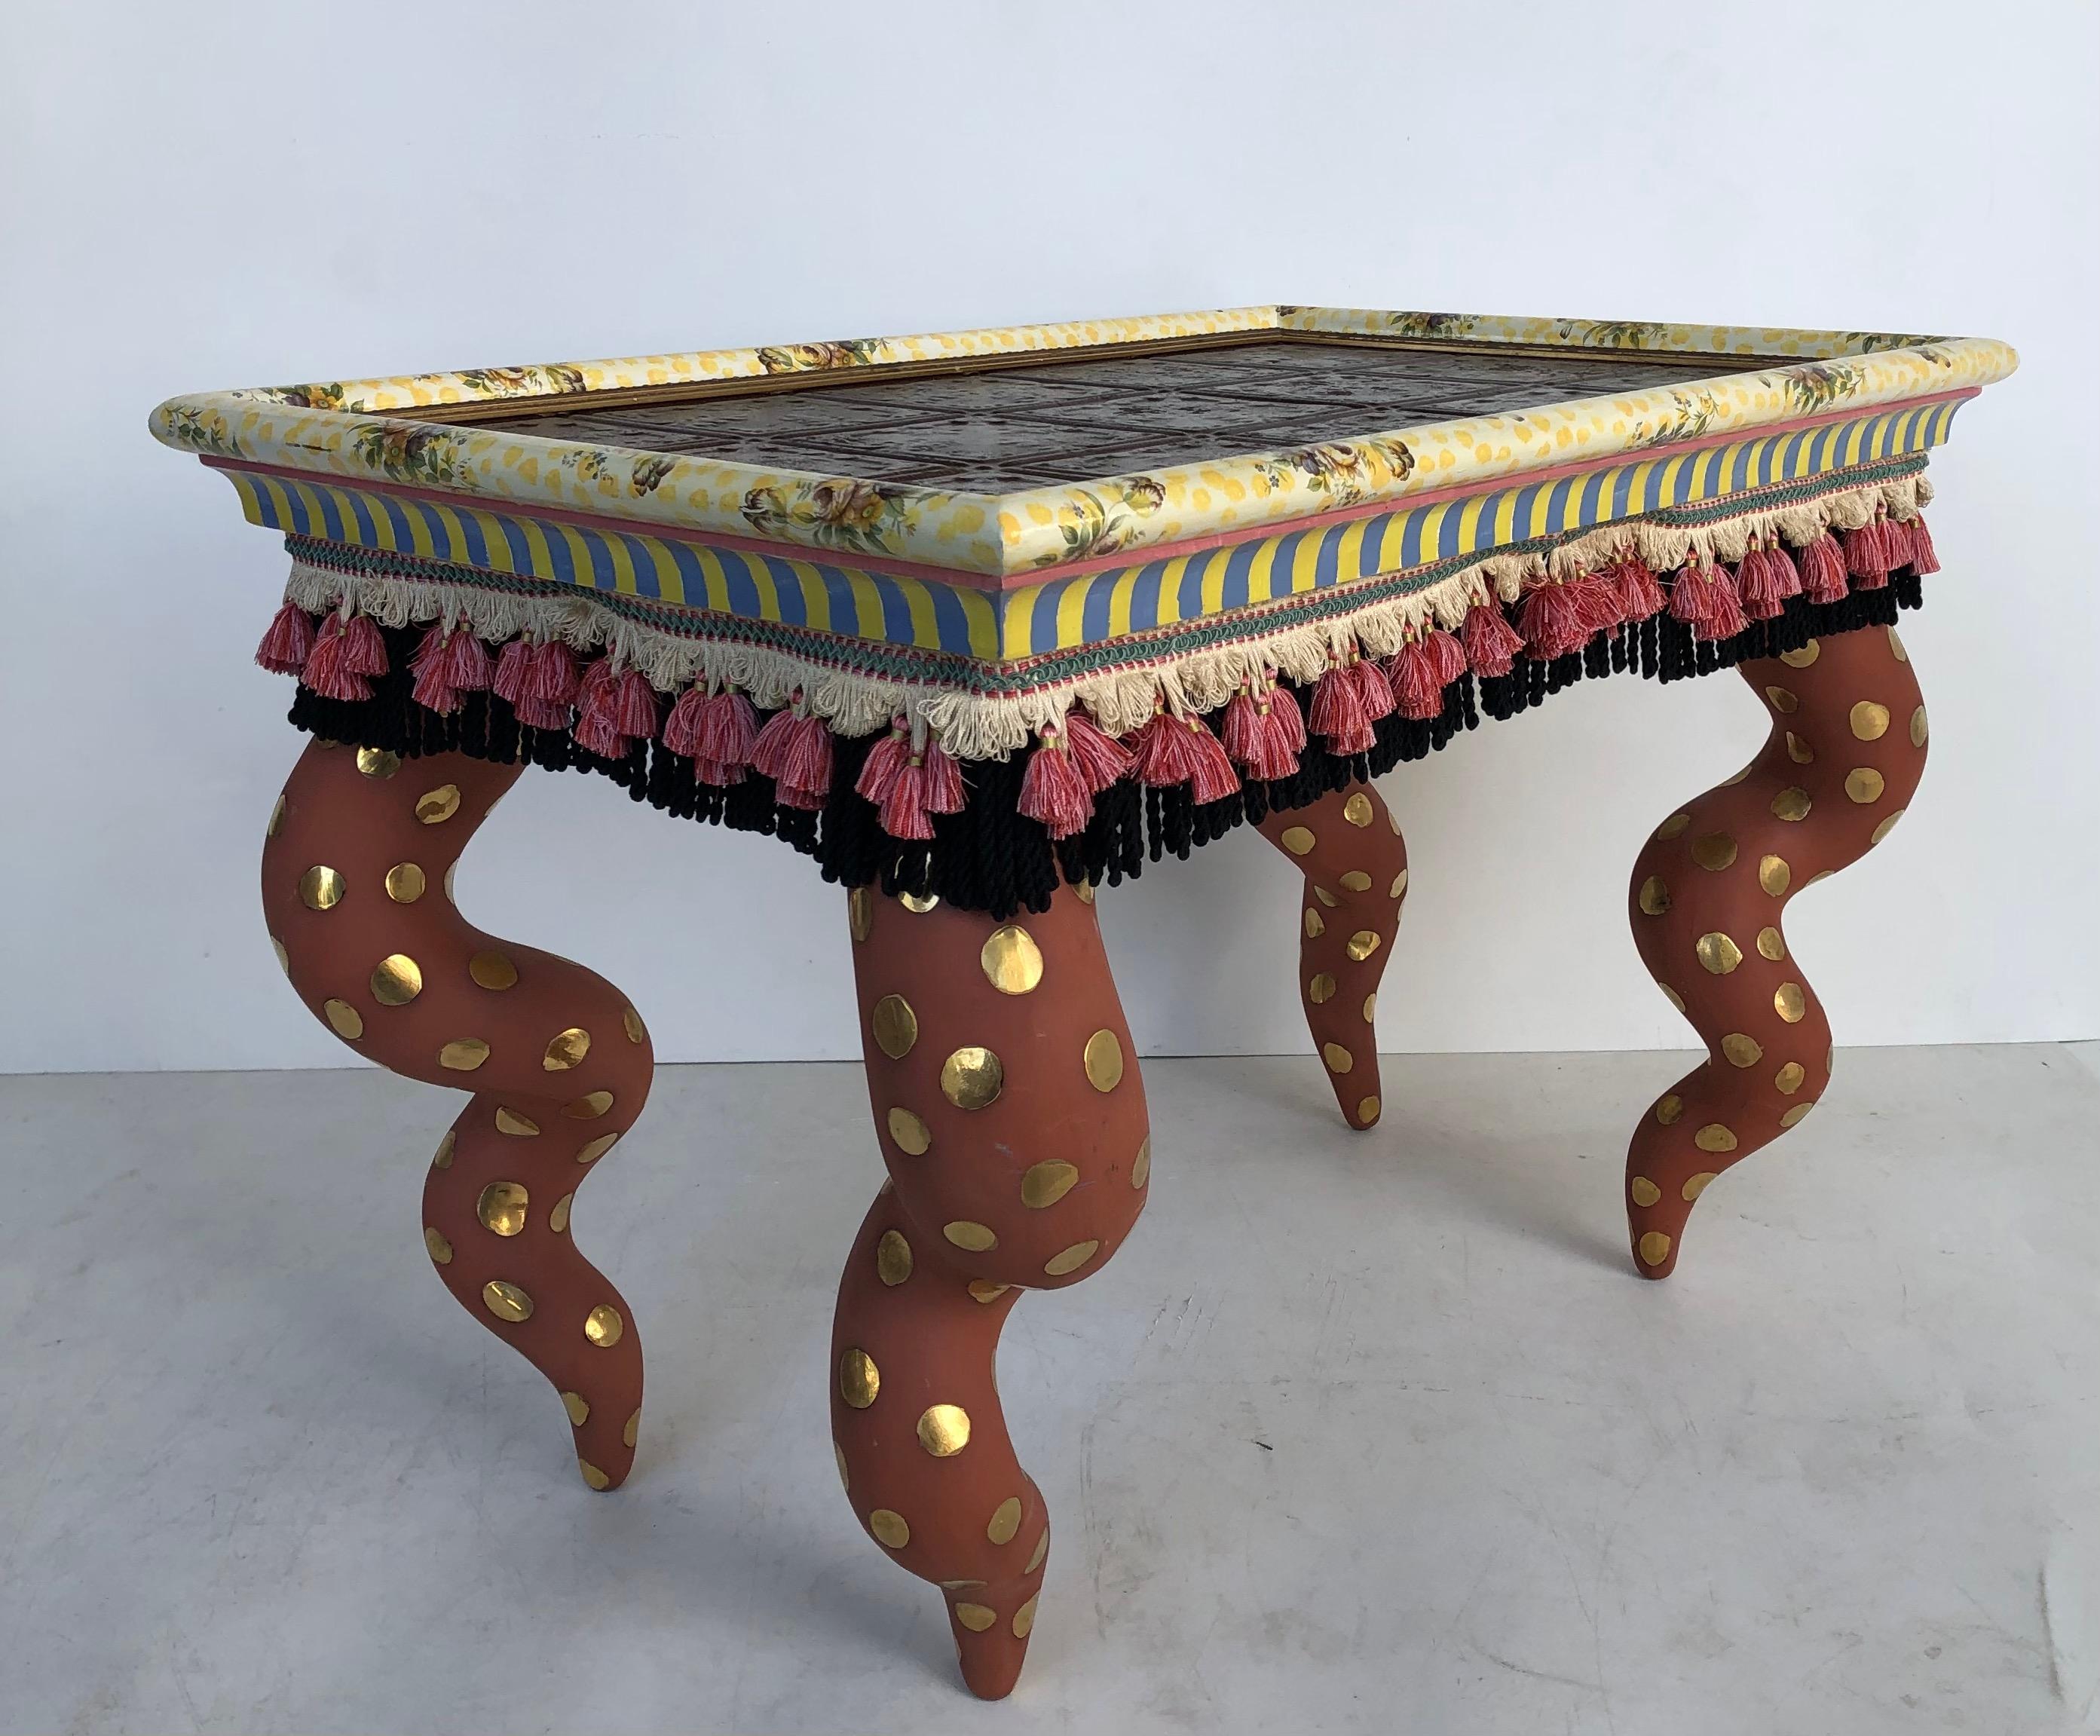 Mackenzie Childs painted ceramic/wood coffee table with tiles, tassels, signed

Offered is a Victoria & Richard Mackenzie Childs ceramic and wood coffee table. The top is inset with glazed tiles. The hand-painted coffee table is decorated with